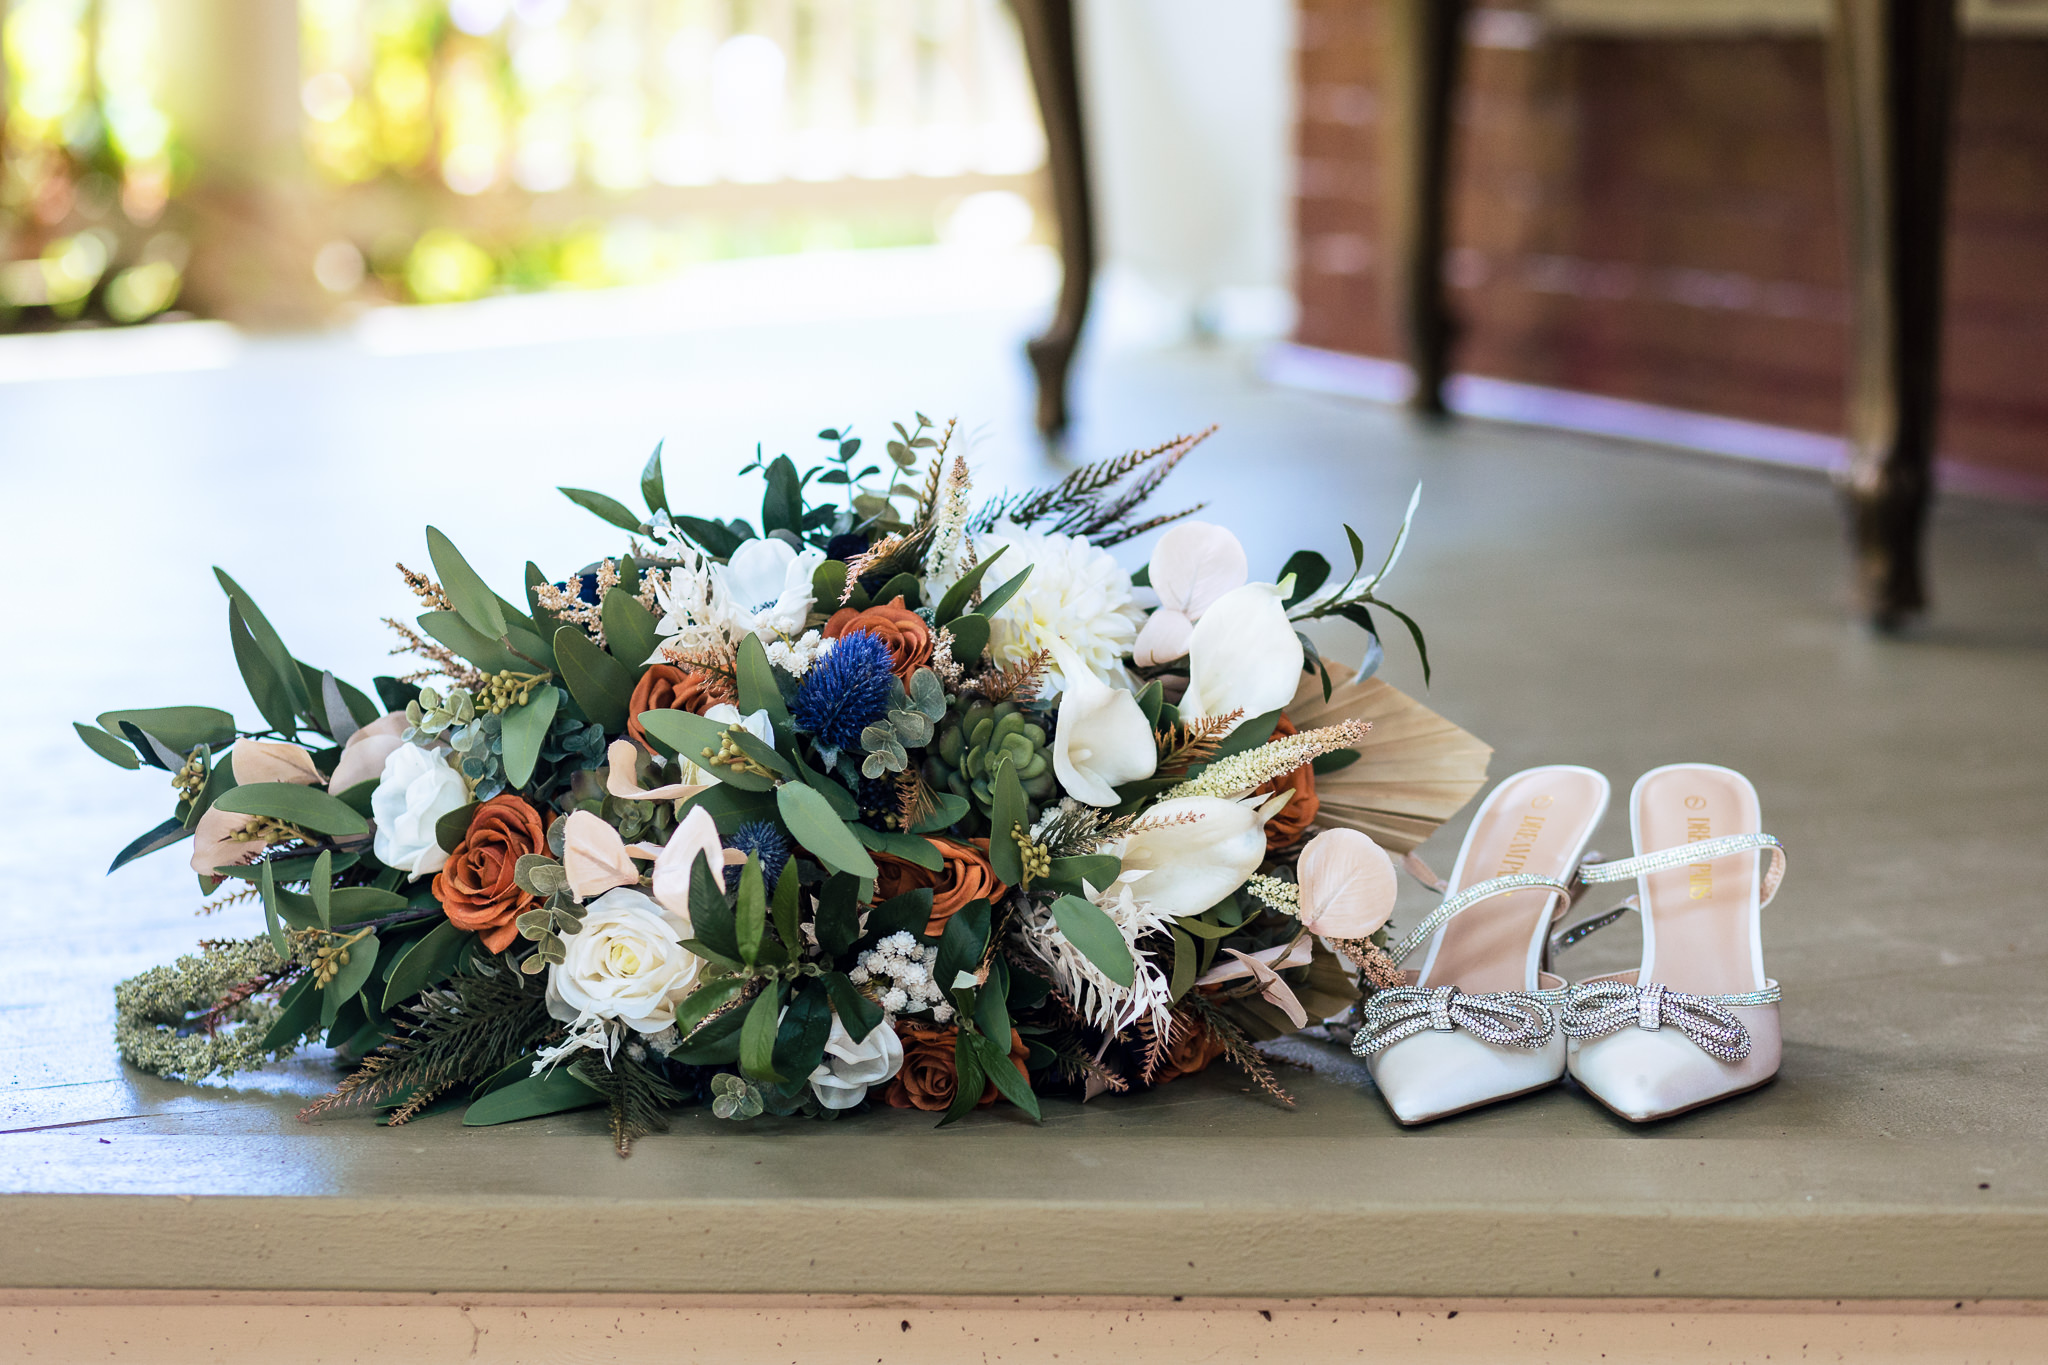 Photo of the bridal bouquet and bride's shoes for Haley & Gytenis' Summer Wedding at The McCreery House by Colorado Wedding Photographer, Jennifer Garza.